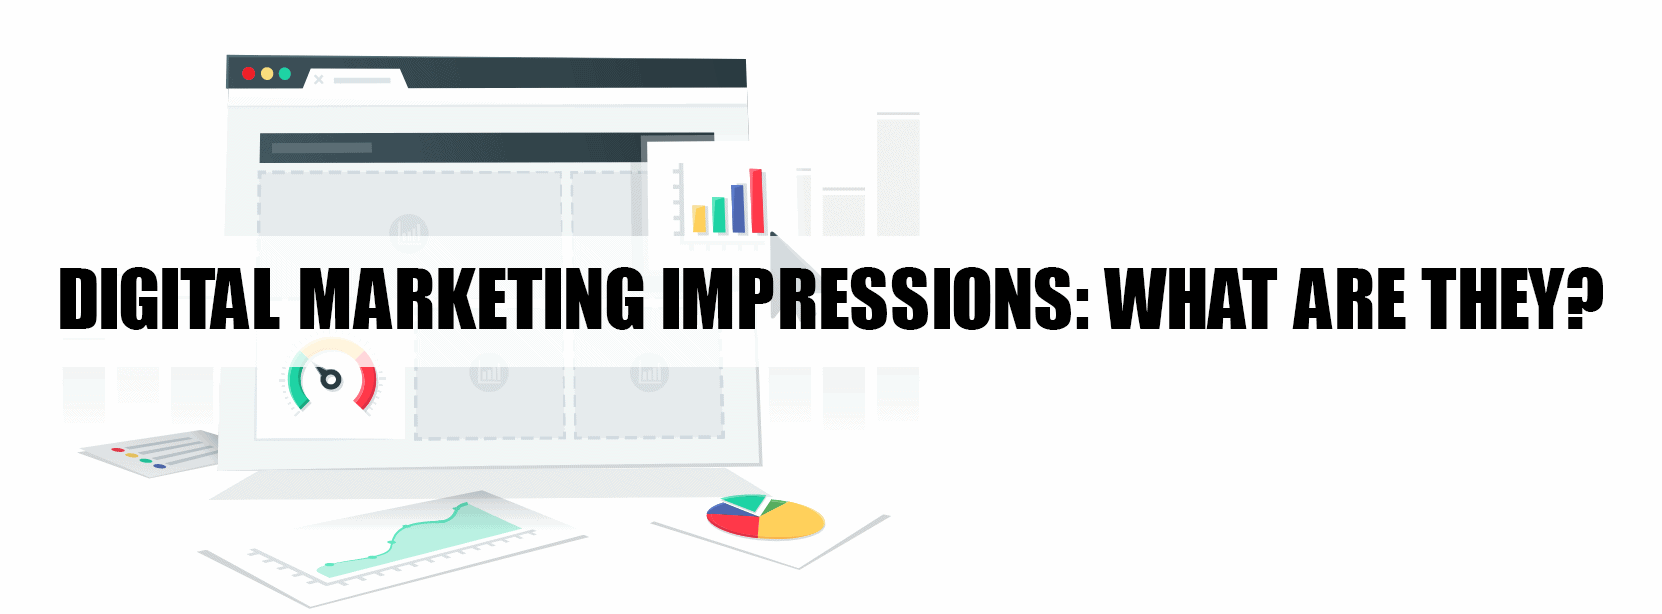 Digital Marketing Impressions: What are They?